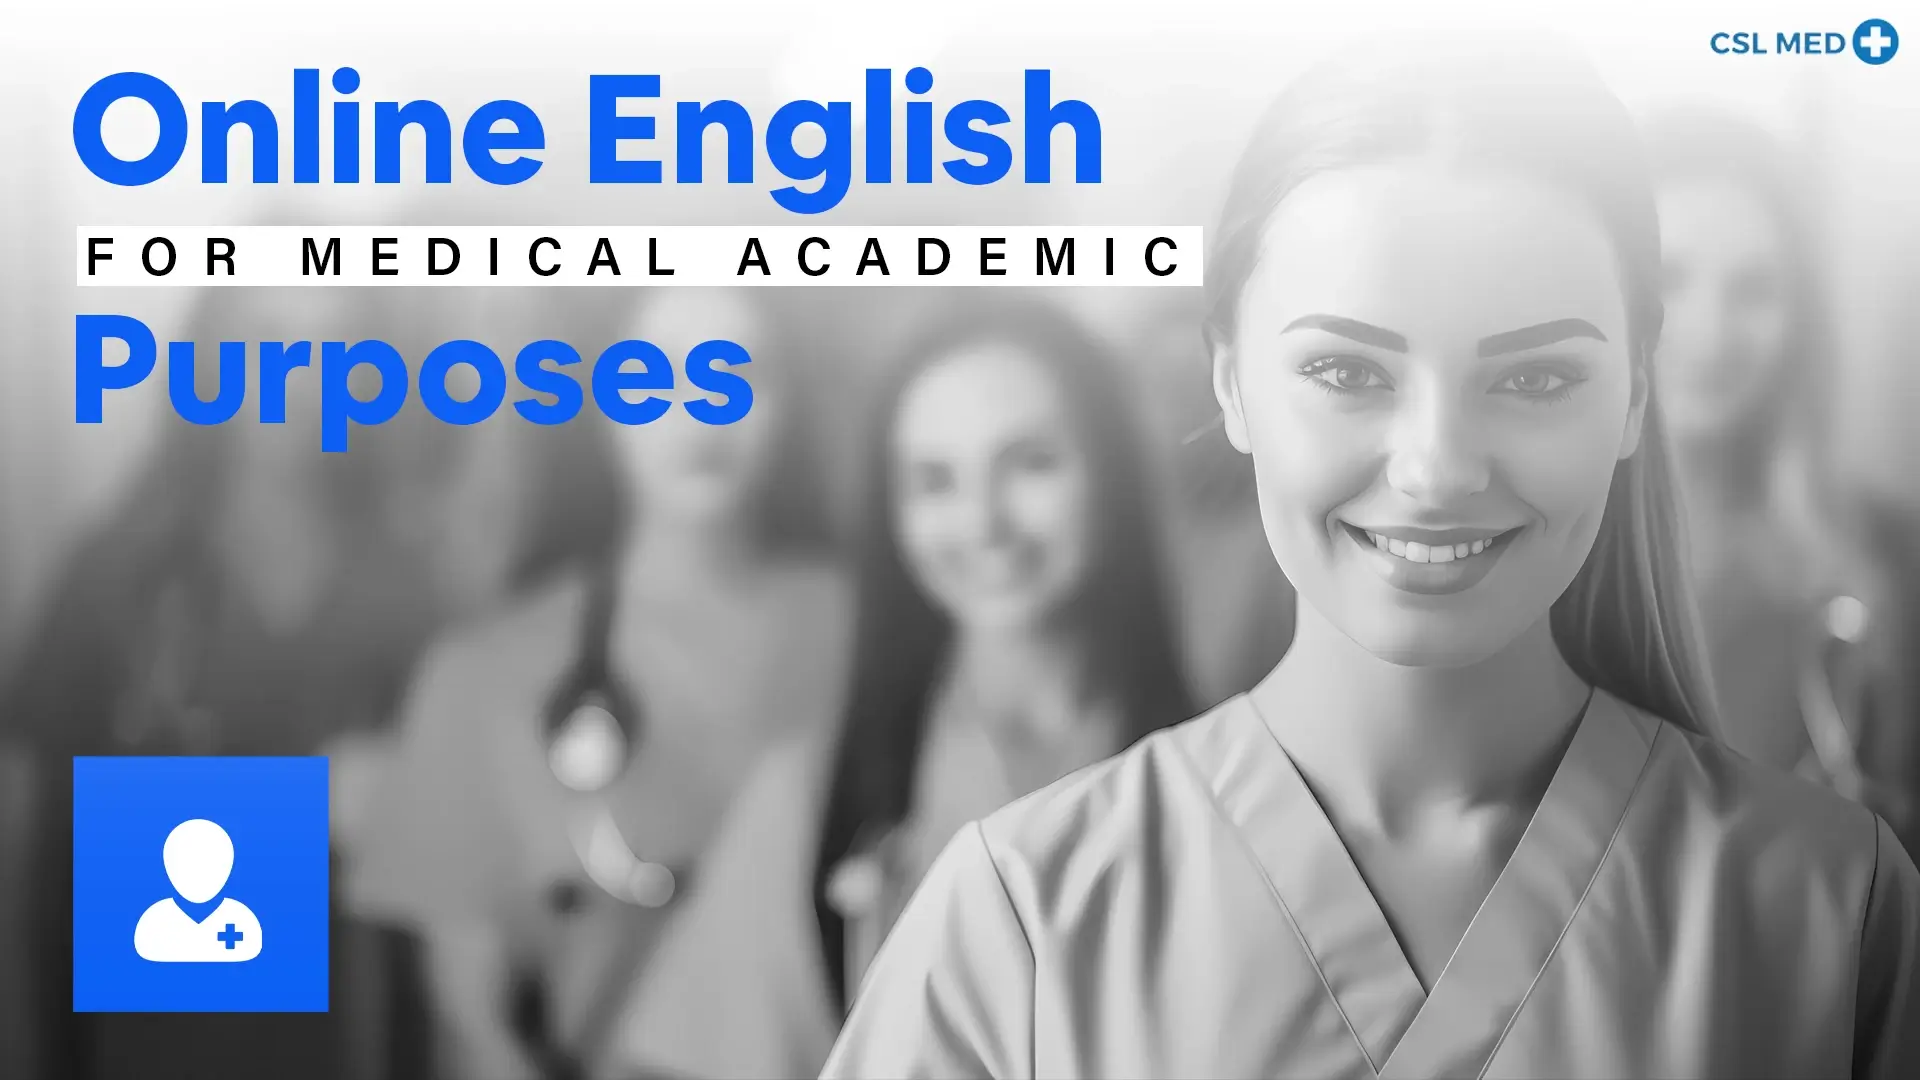 Online English for medical academic purposes